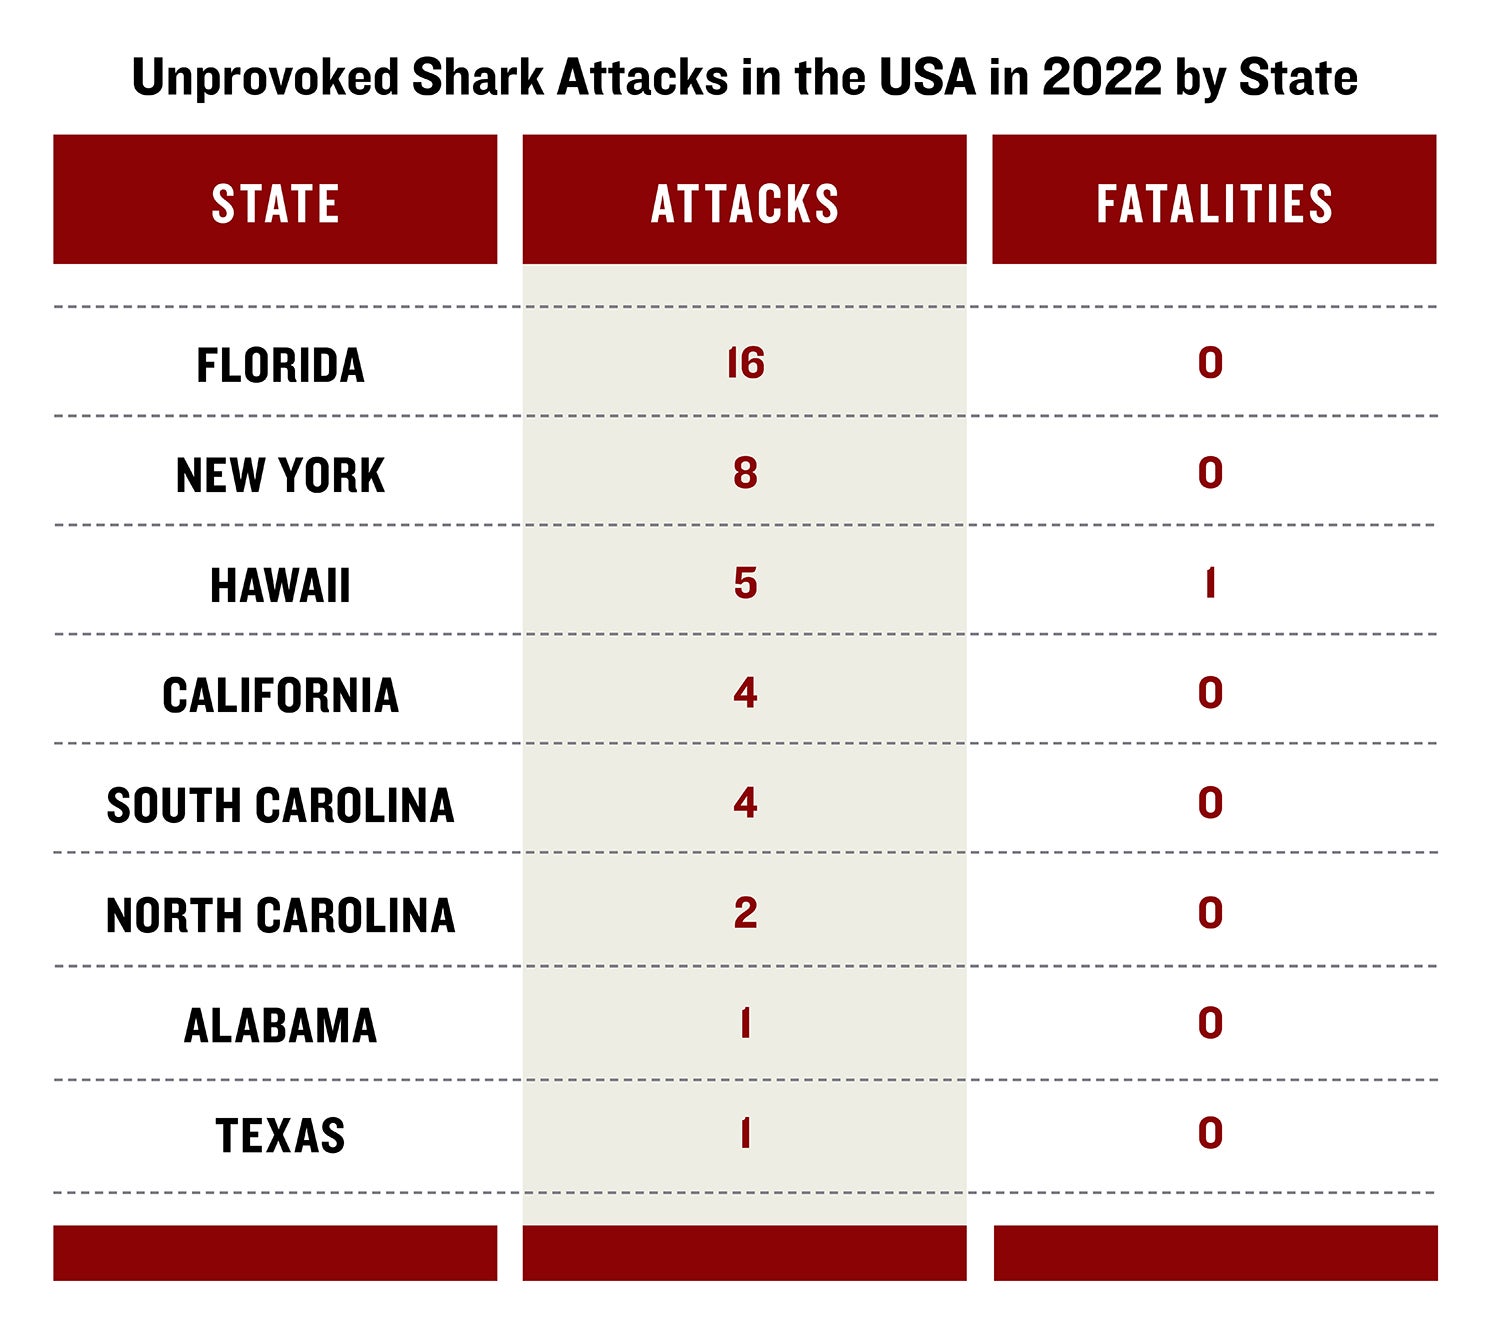 chart showing the number of shark attacks in 2022 by state